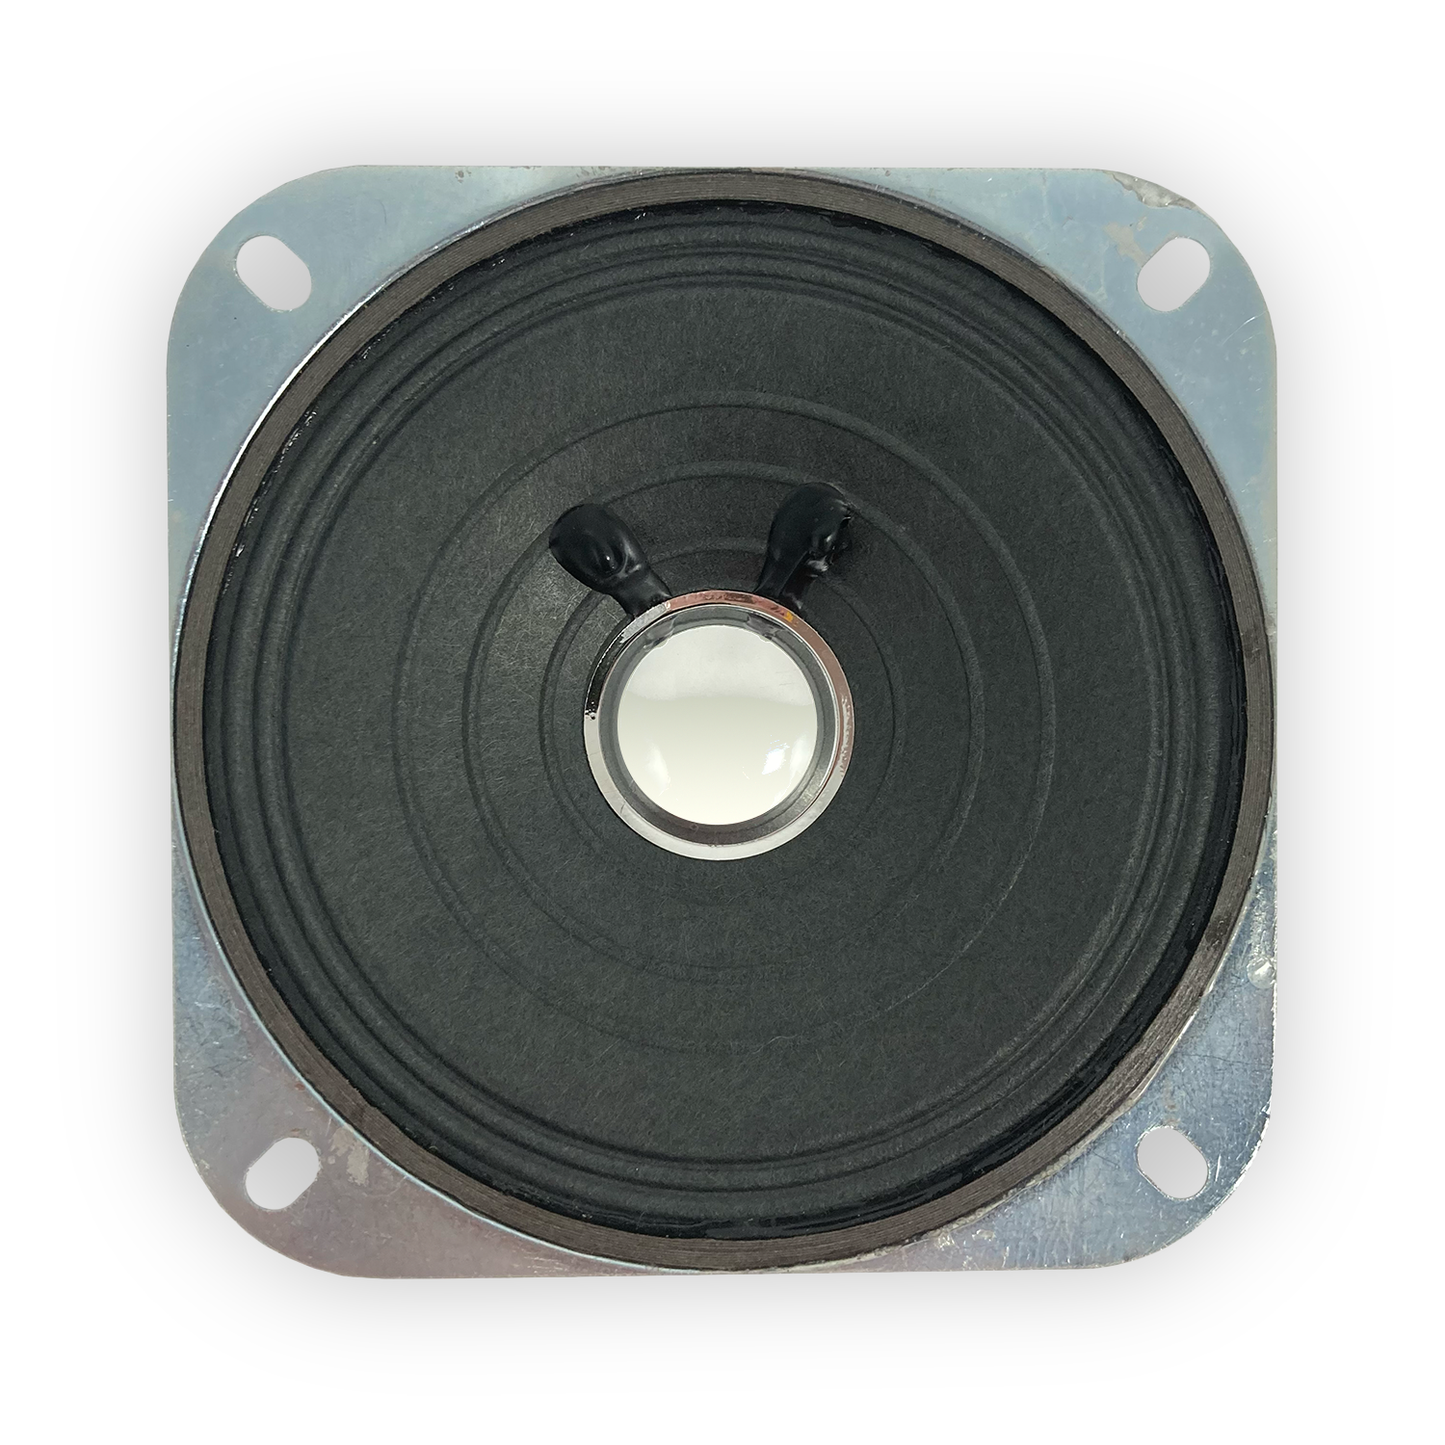 Update your Cabinet Mounted Speaker to give your customers the auditory feedback they are looking for.